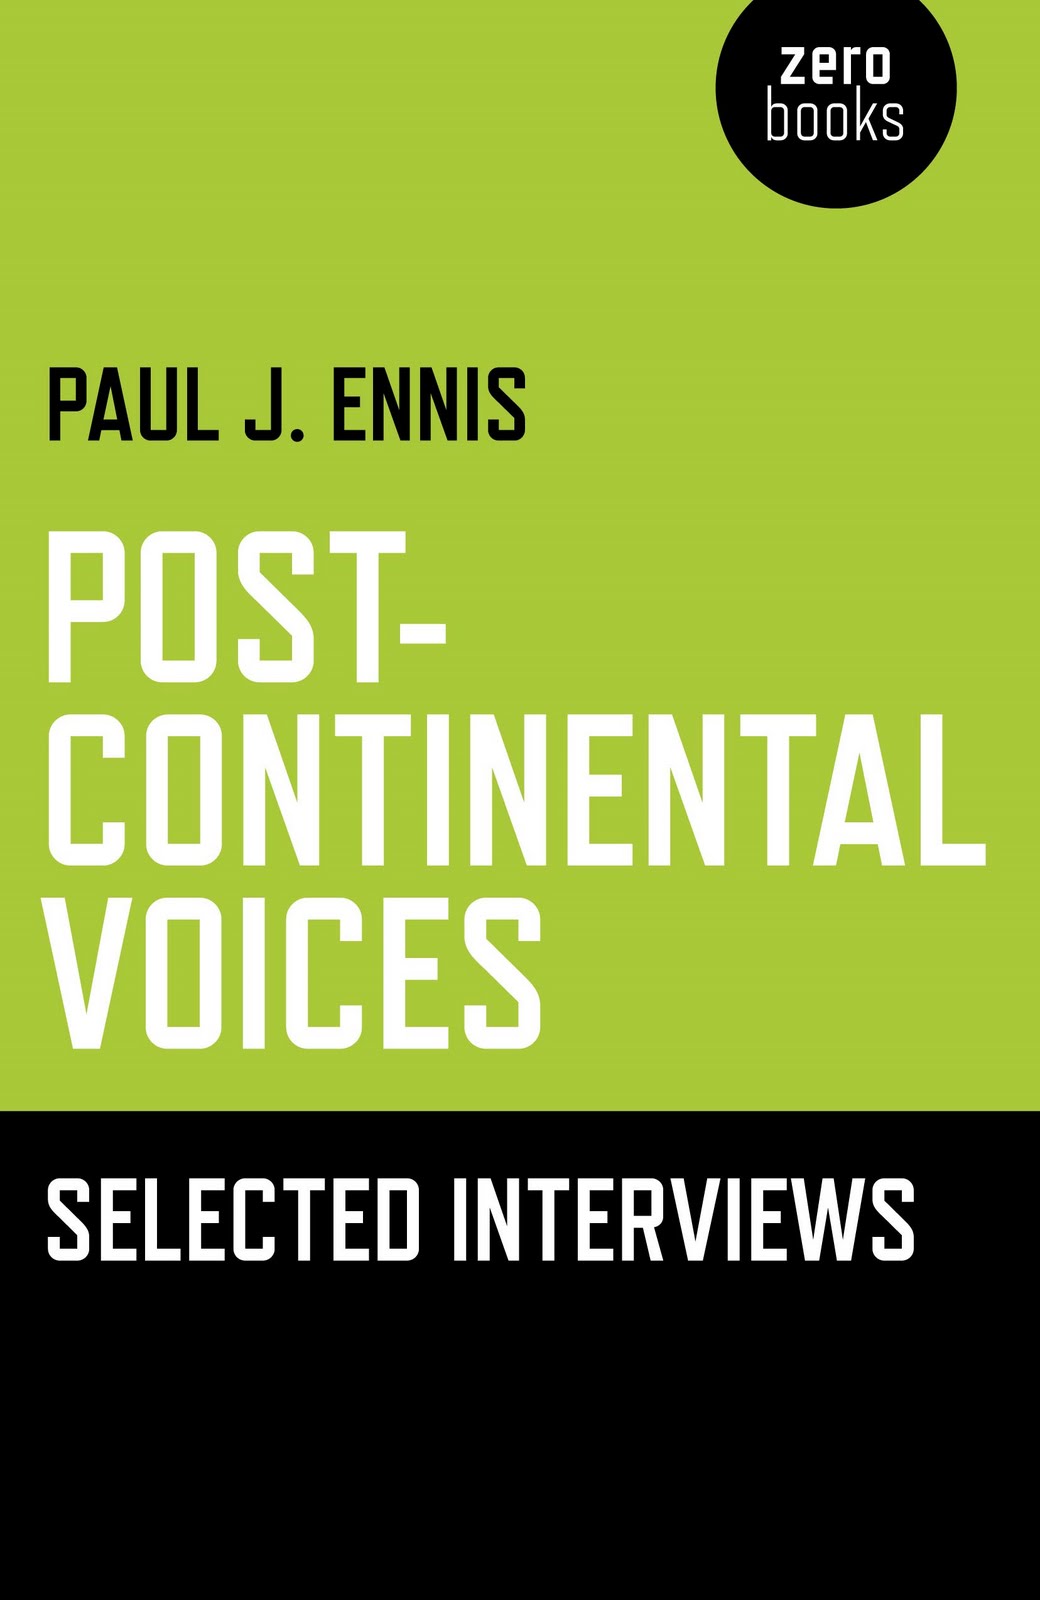 [Post-Continental_Voices_cover_300.jpg]